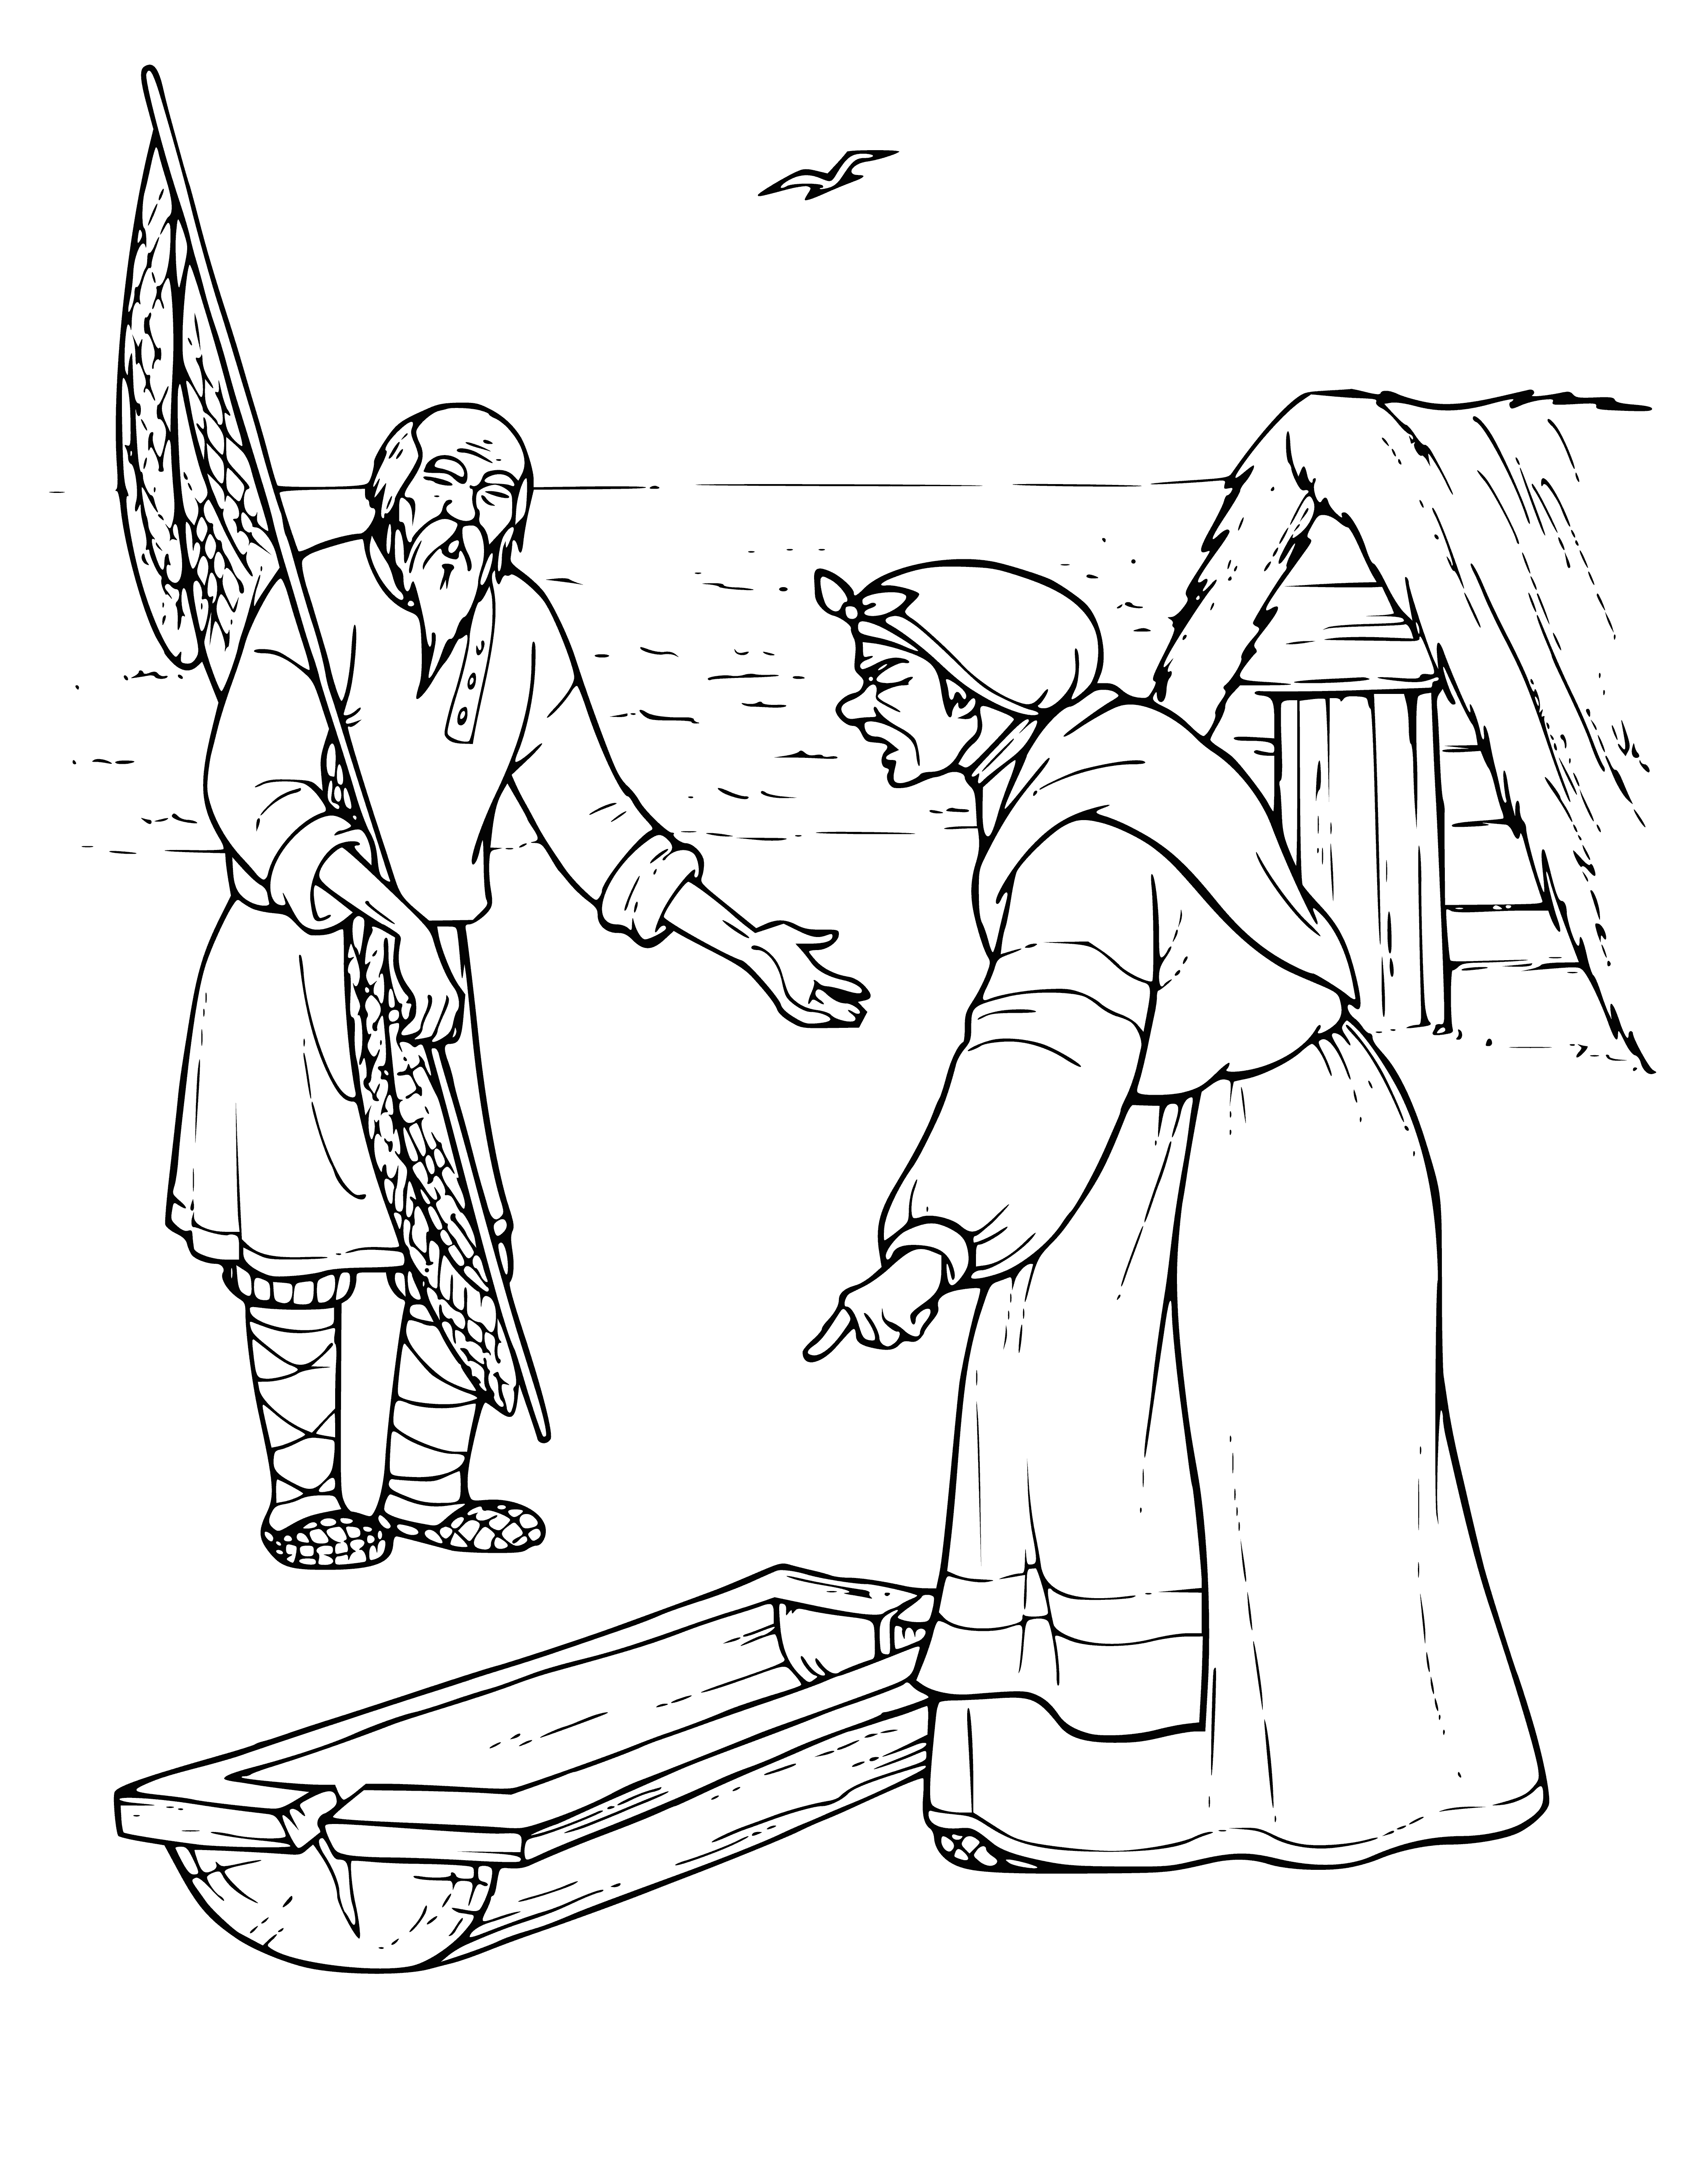 coloring page: Old woman angrily scolding young man, who cowers behind tree in fear. Her face is red.